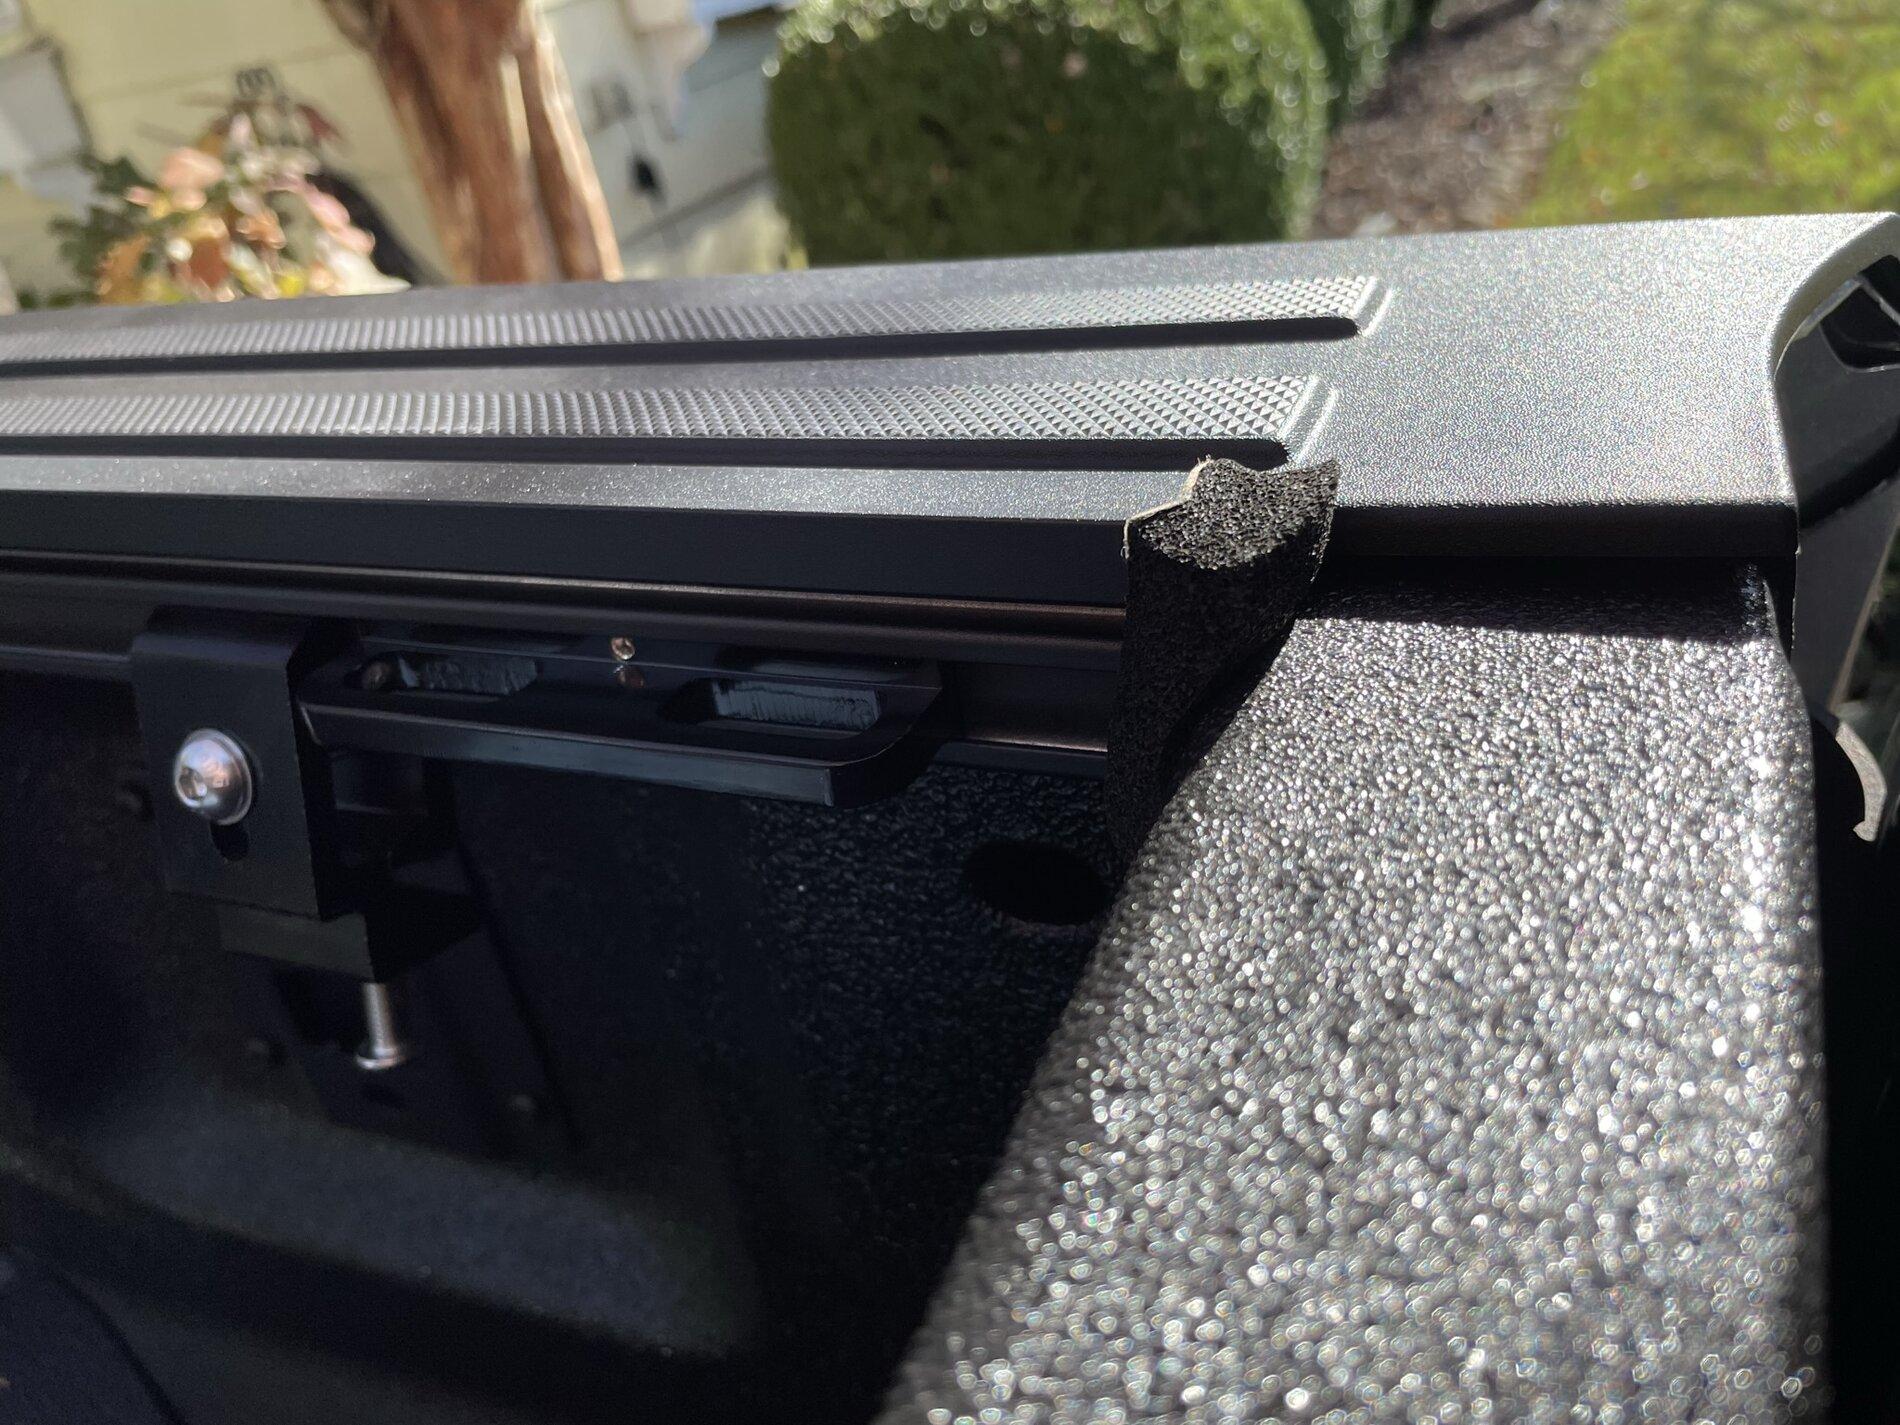 Ford F-150 Lightning Leer HF650M Tonneau Cover Review with Photos! - Install & First Impressions IMG_6458.JPEG